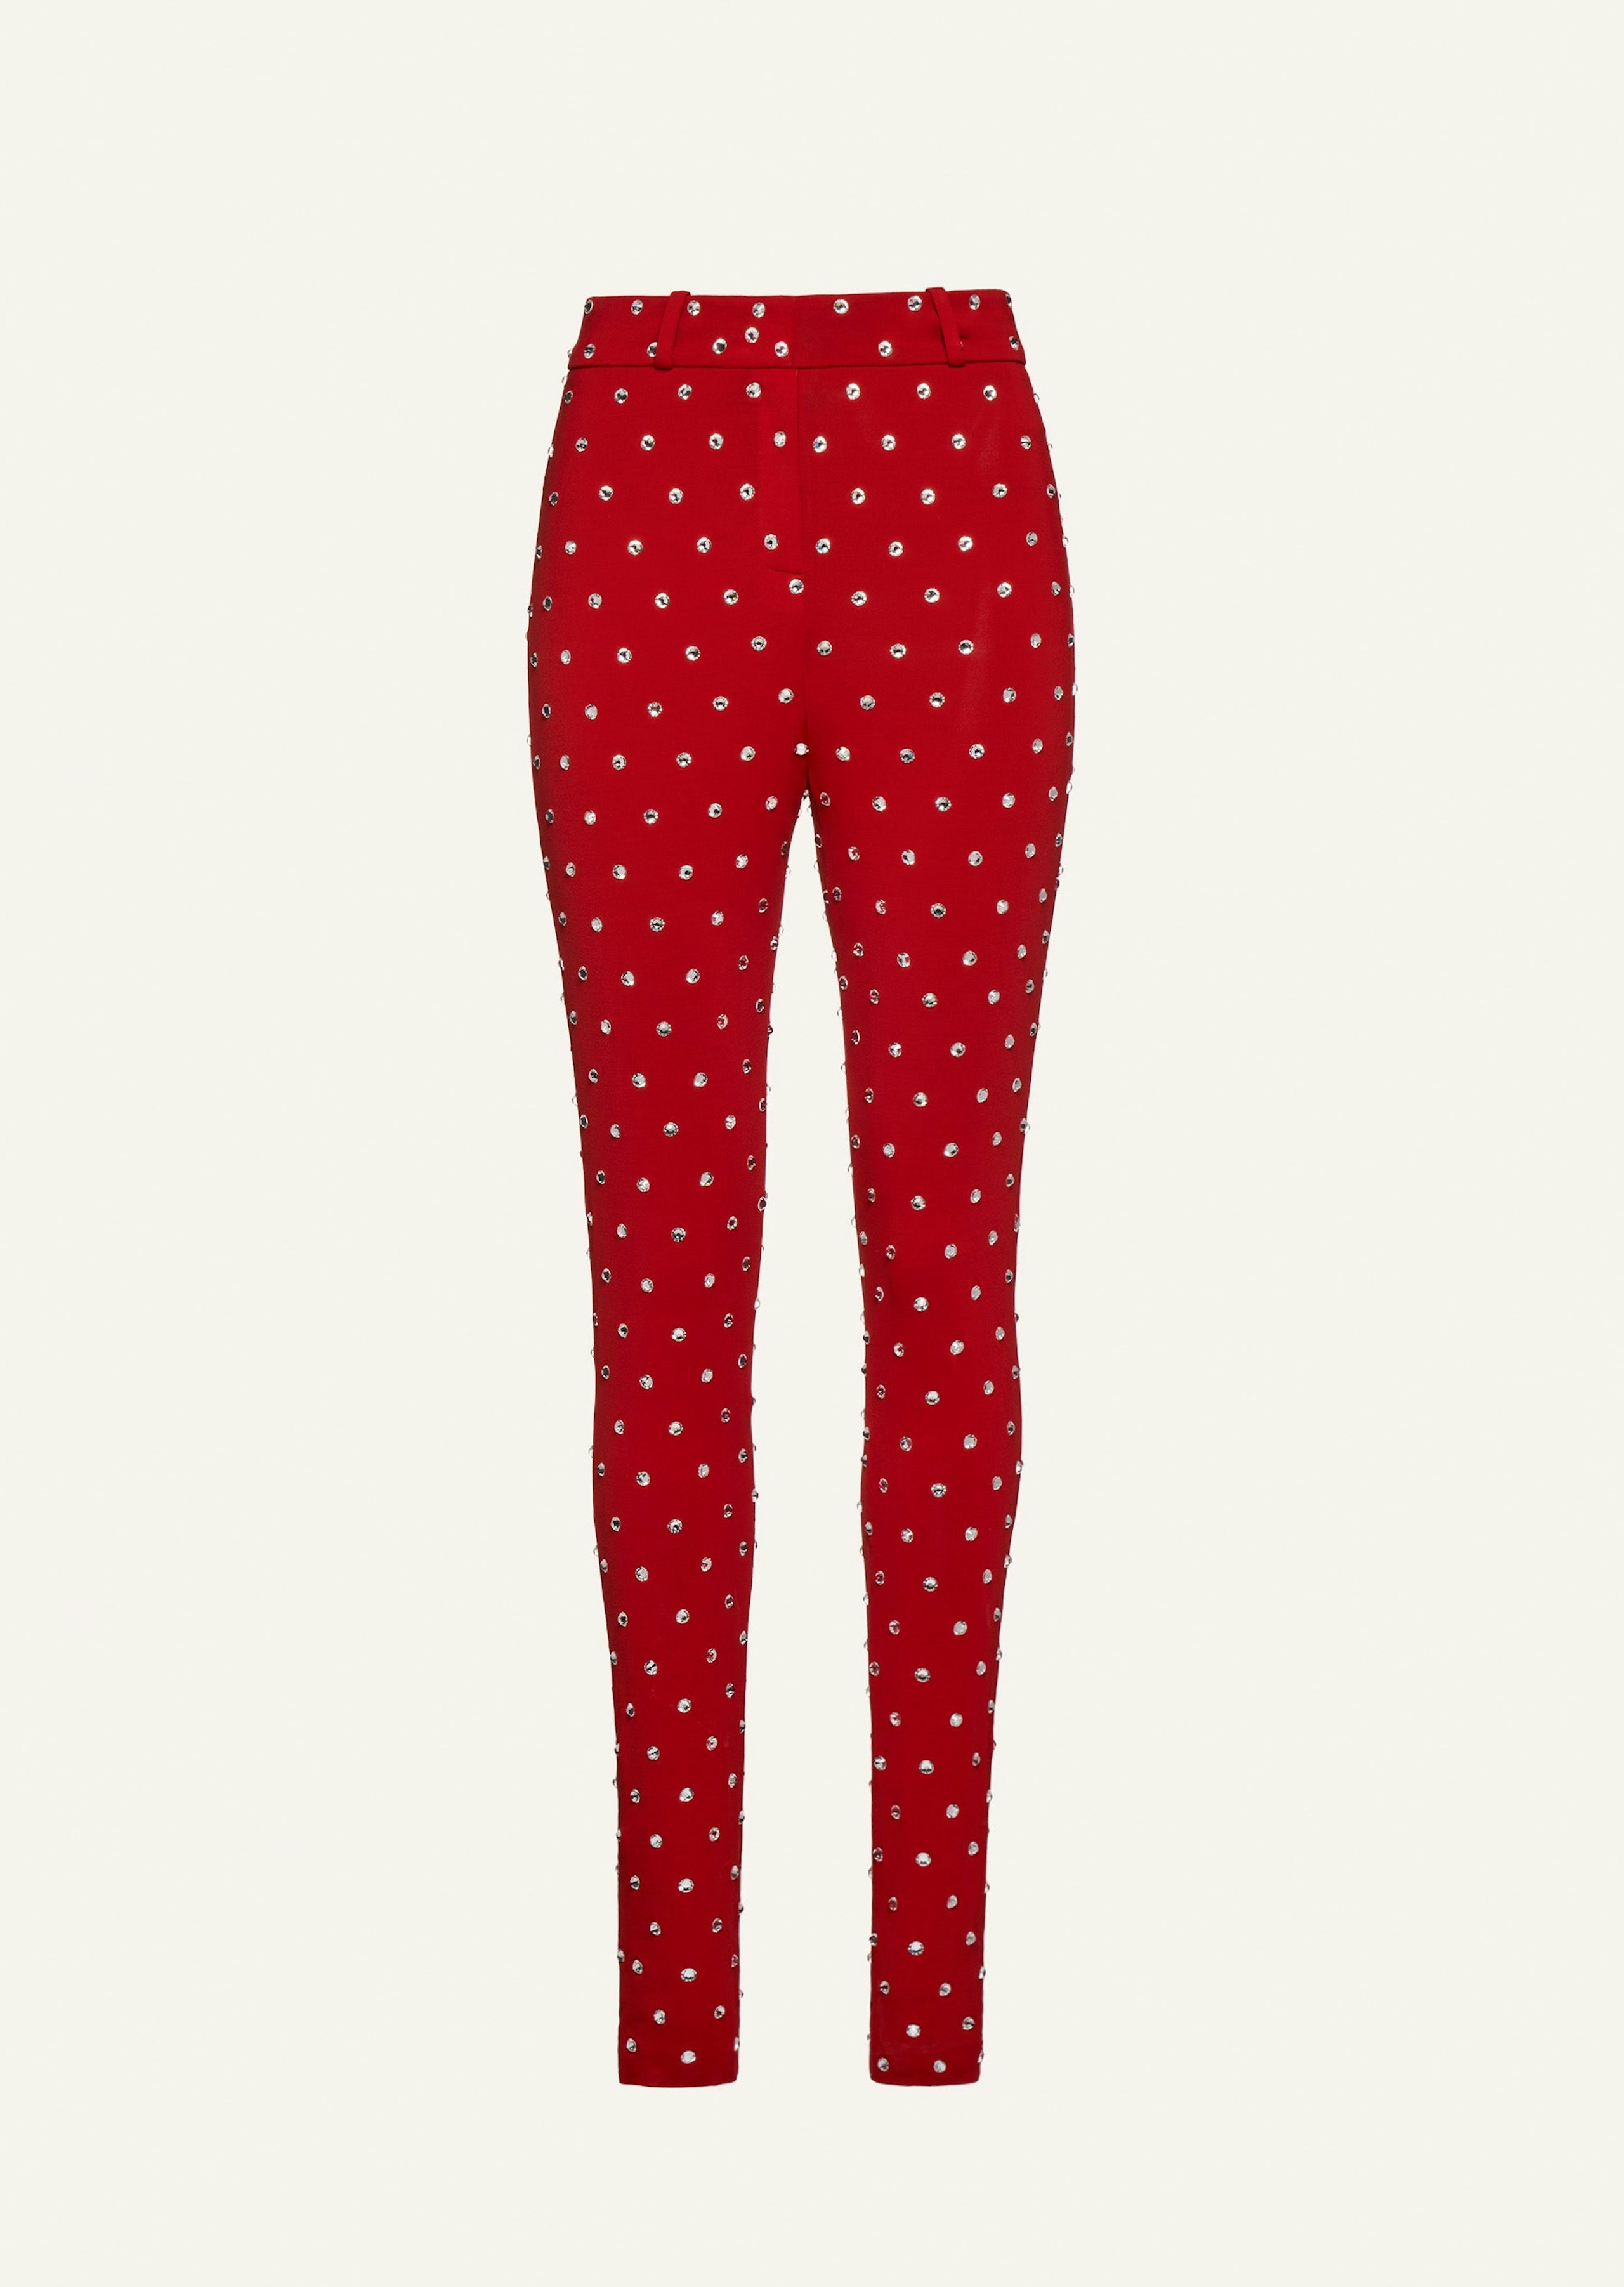 AW22 PANTS 04 RED CRYSTALS